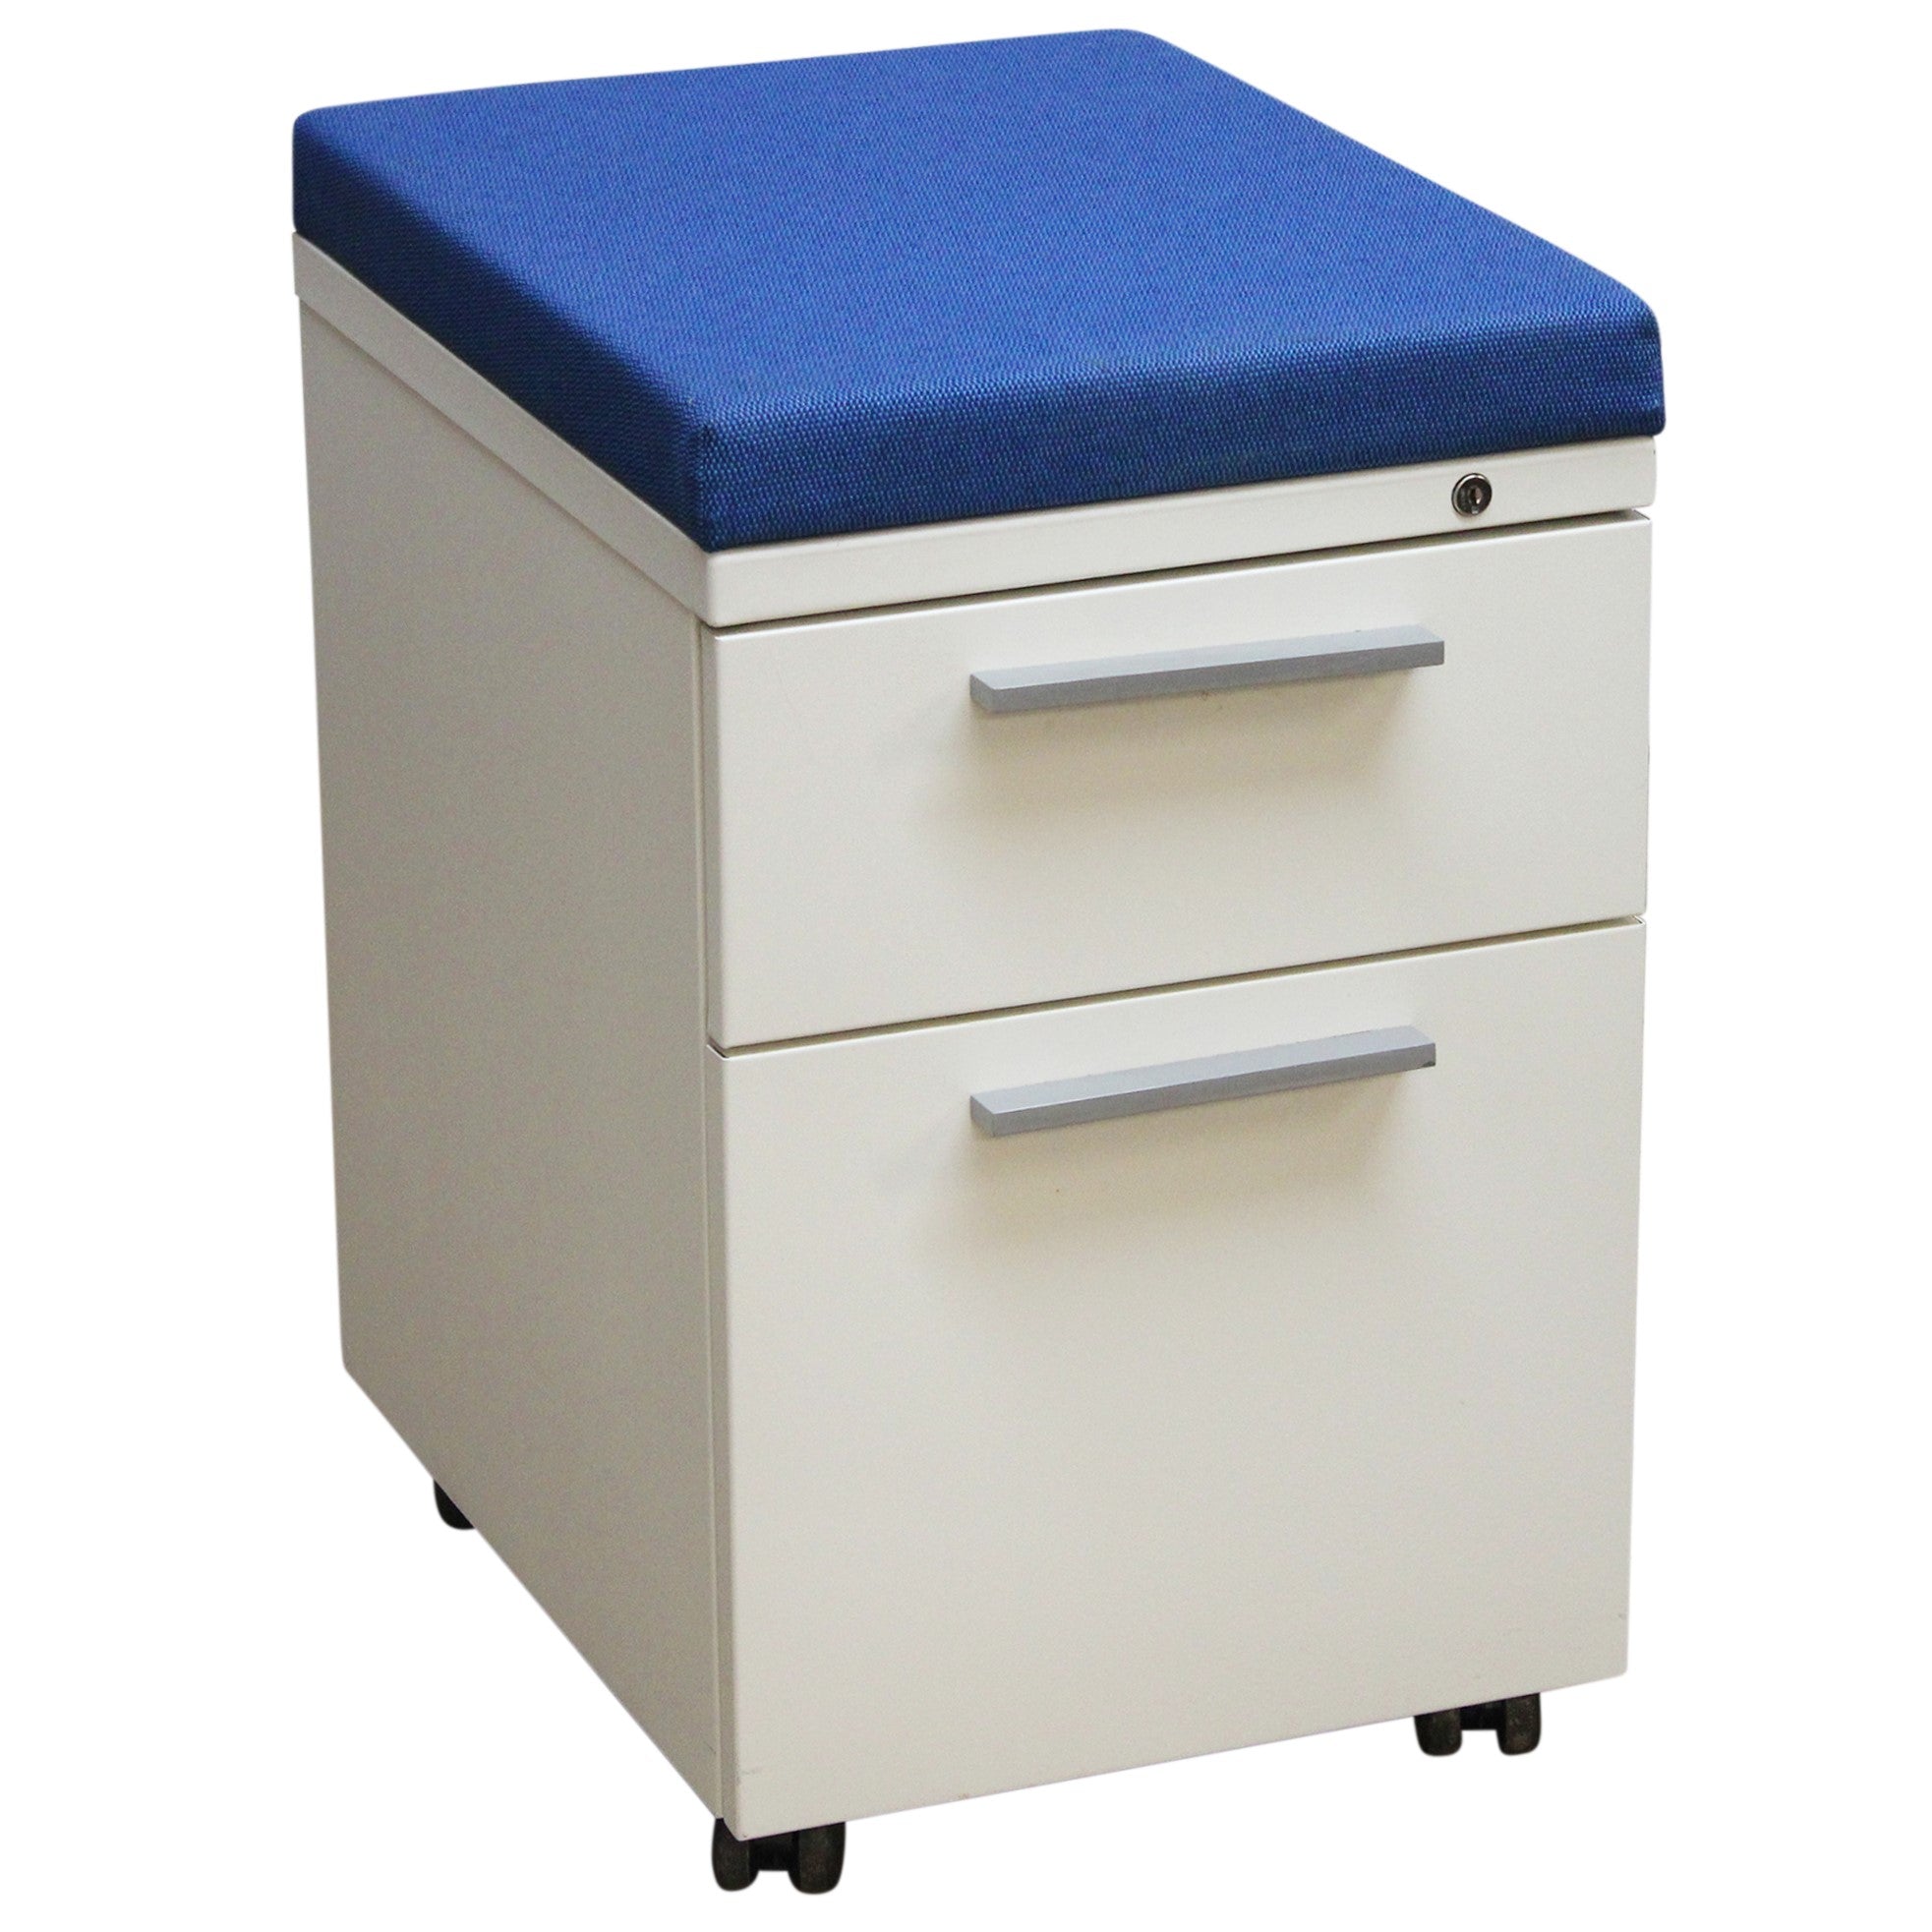 2-Drawer Mobile Pedestal with Cushion, Blue & White - Preowned